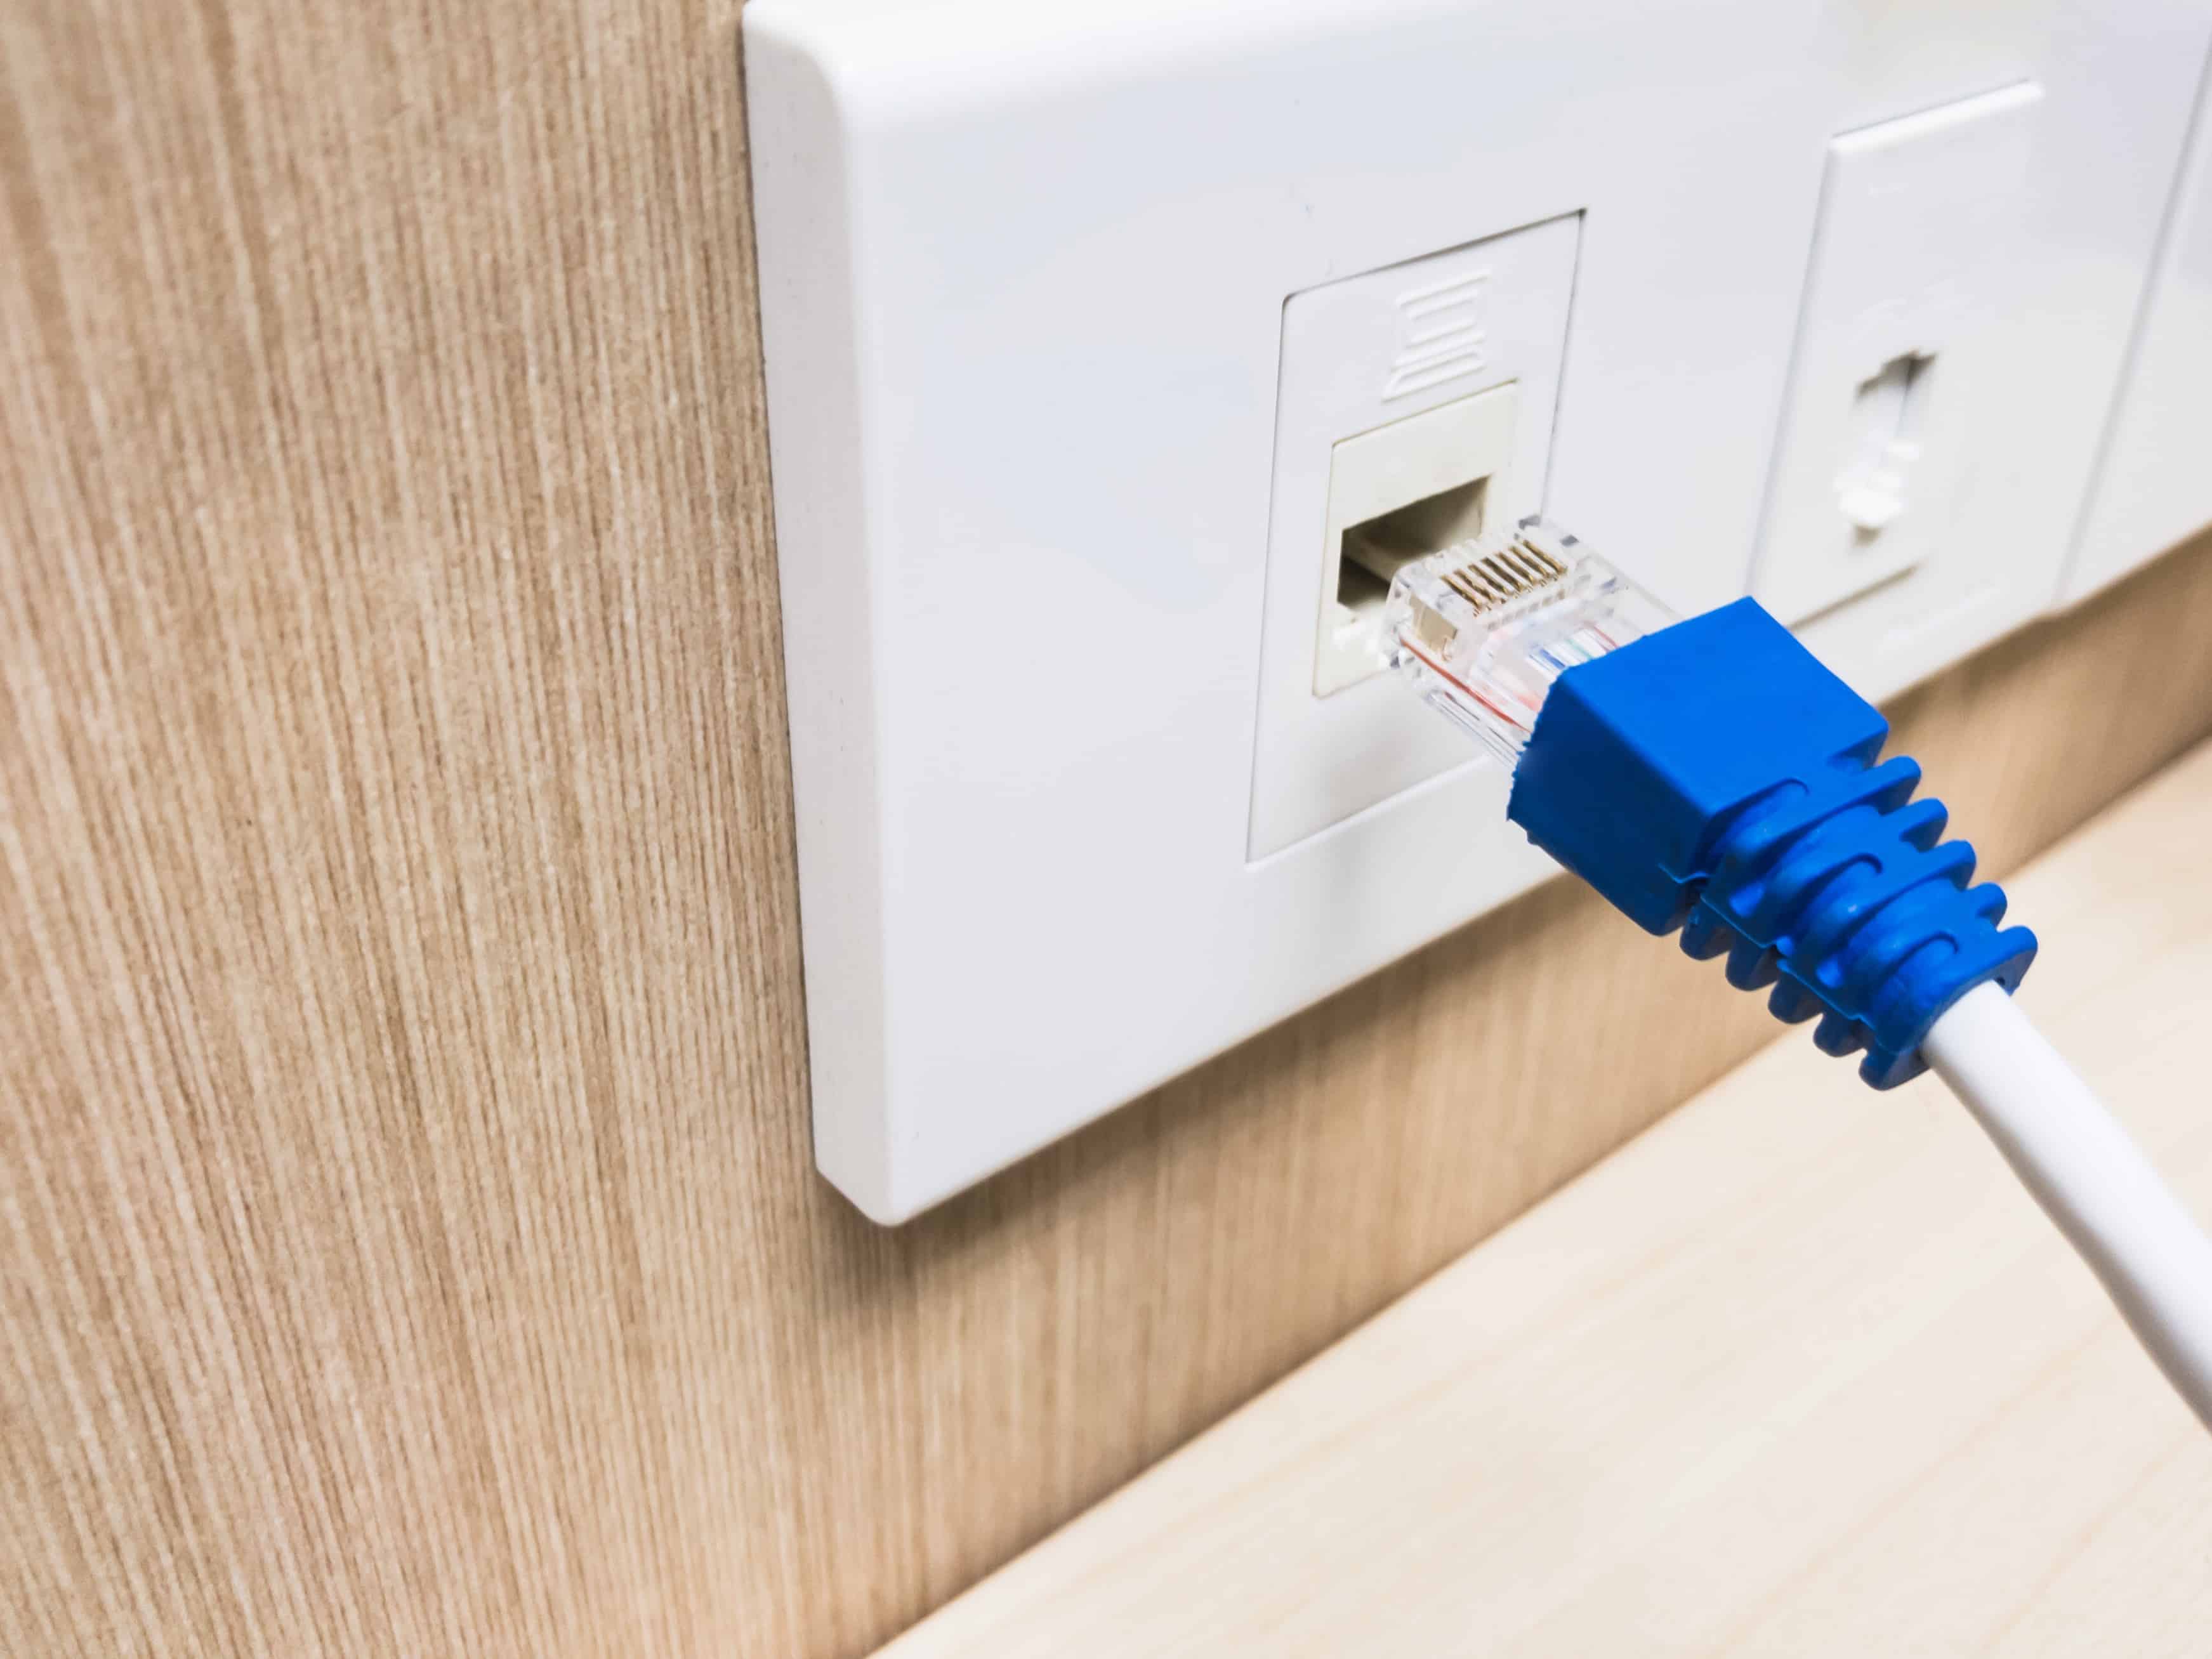 What If My House Has No Ethernet Ports?